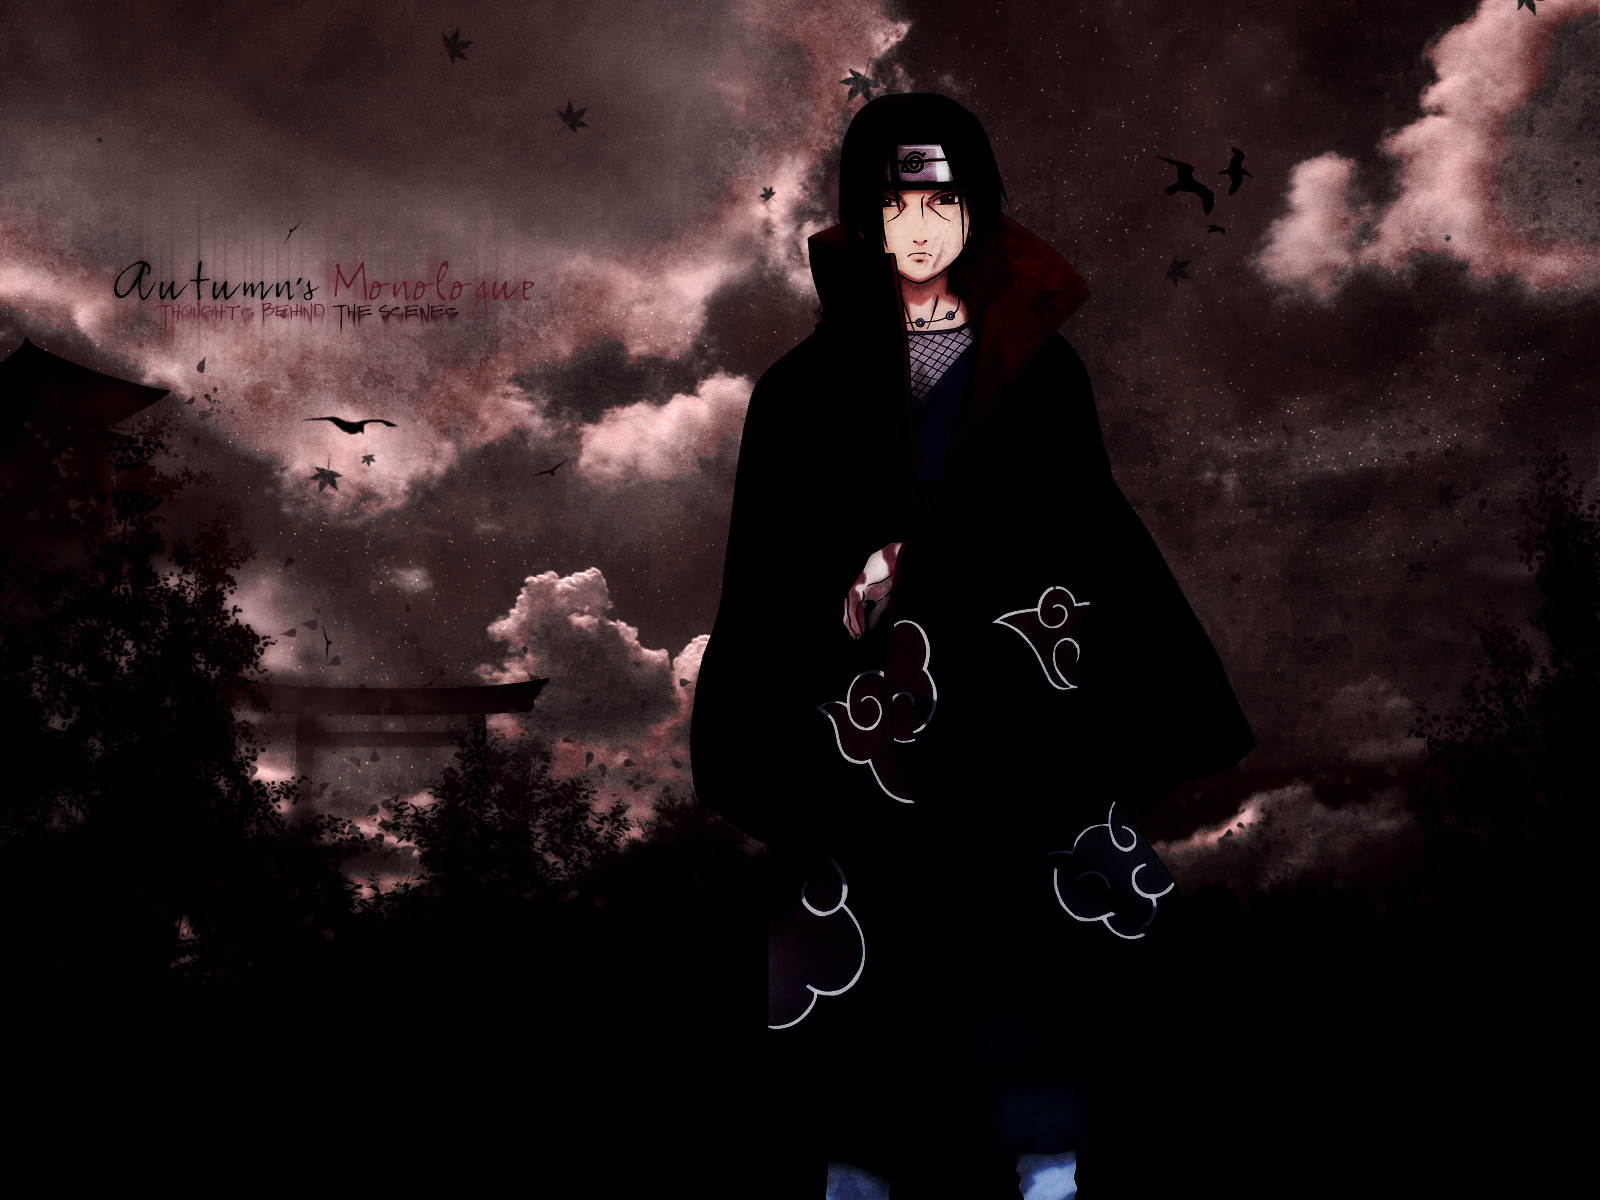 Naruto Shippuden Wallpaper Itachi Images amp Pictures   Becuo